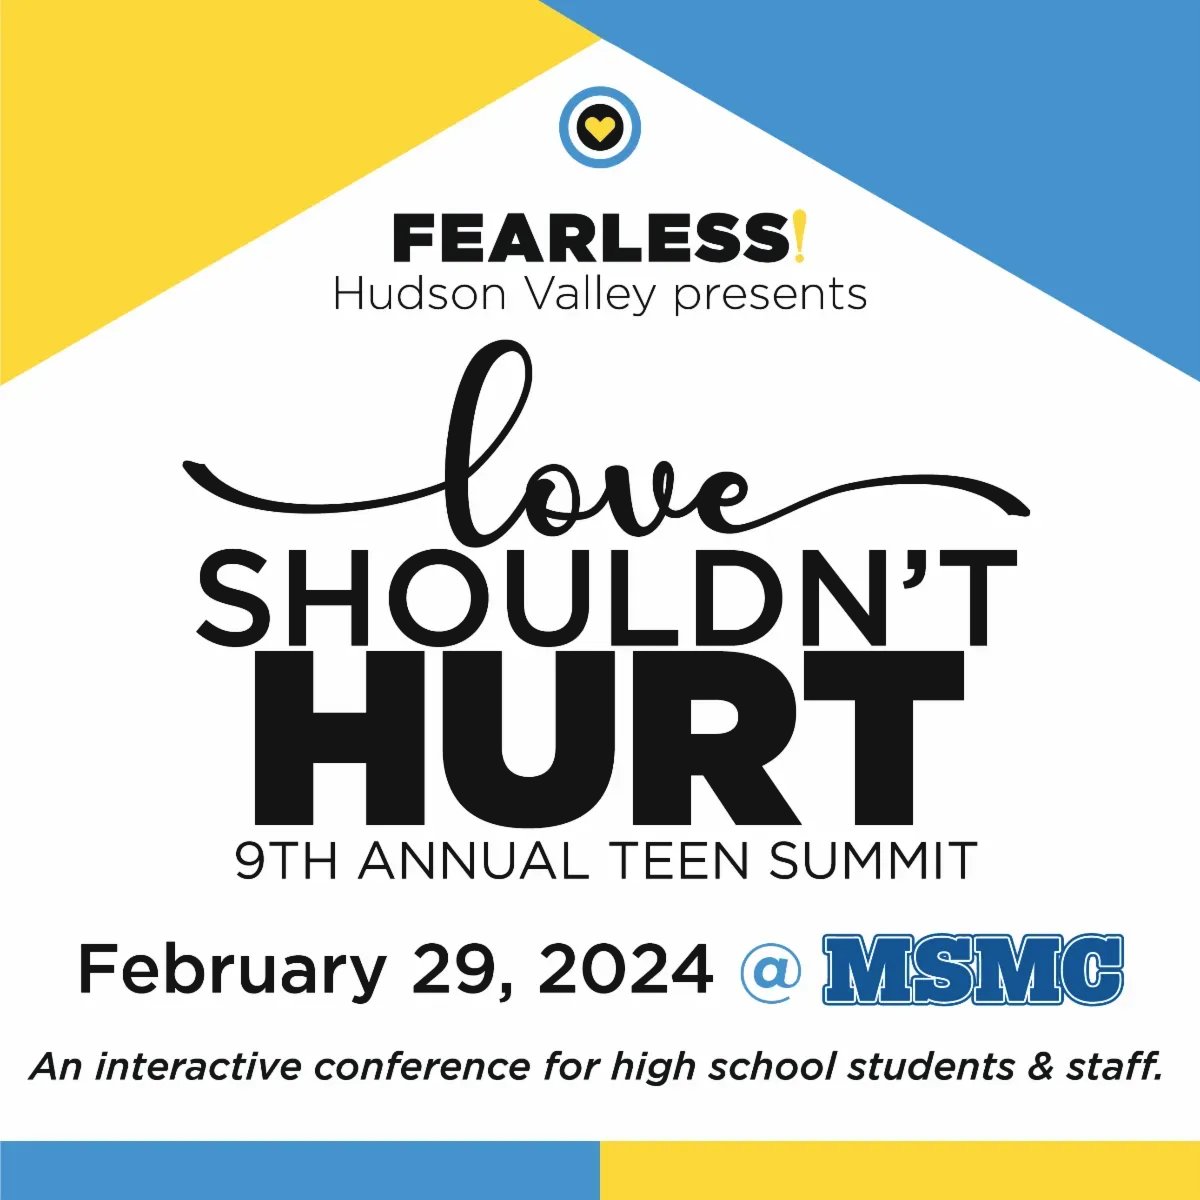 Fearless Hudson Valley will be hosting it's 9th Annual Teen Summit, 'Love Doesn't Hurt' again this coming February. You can learn more and register for this event today at fearlesshv.org.

#mayagoldfoundation #orangecounty #sullivancounty #fearlesshv #hudsonvalleyteens